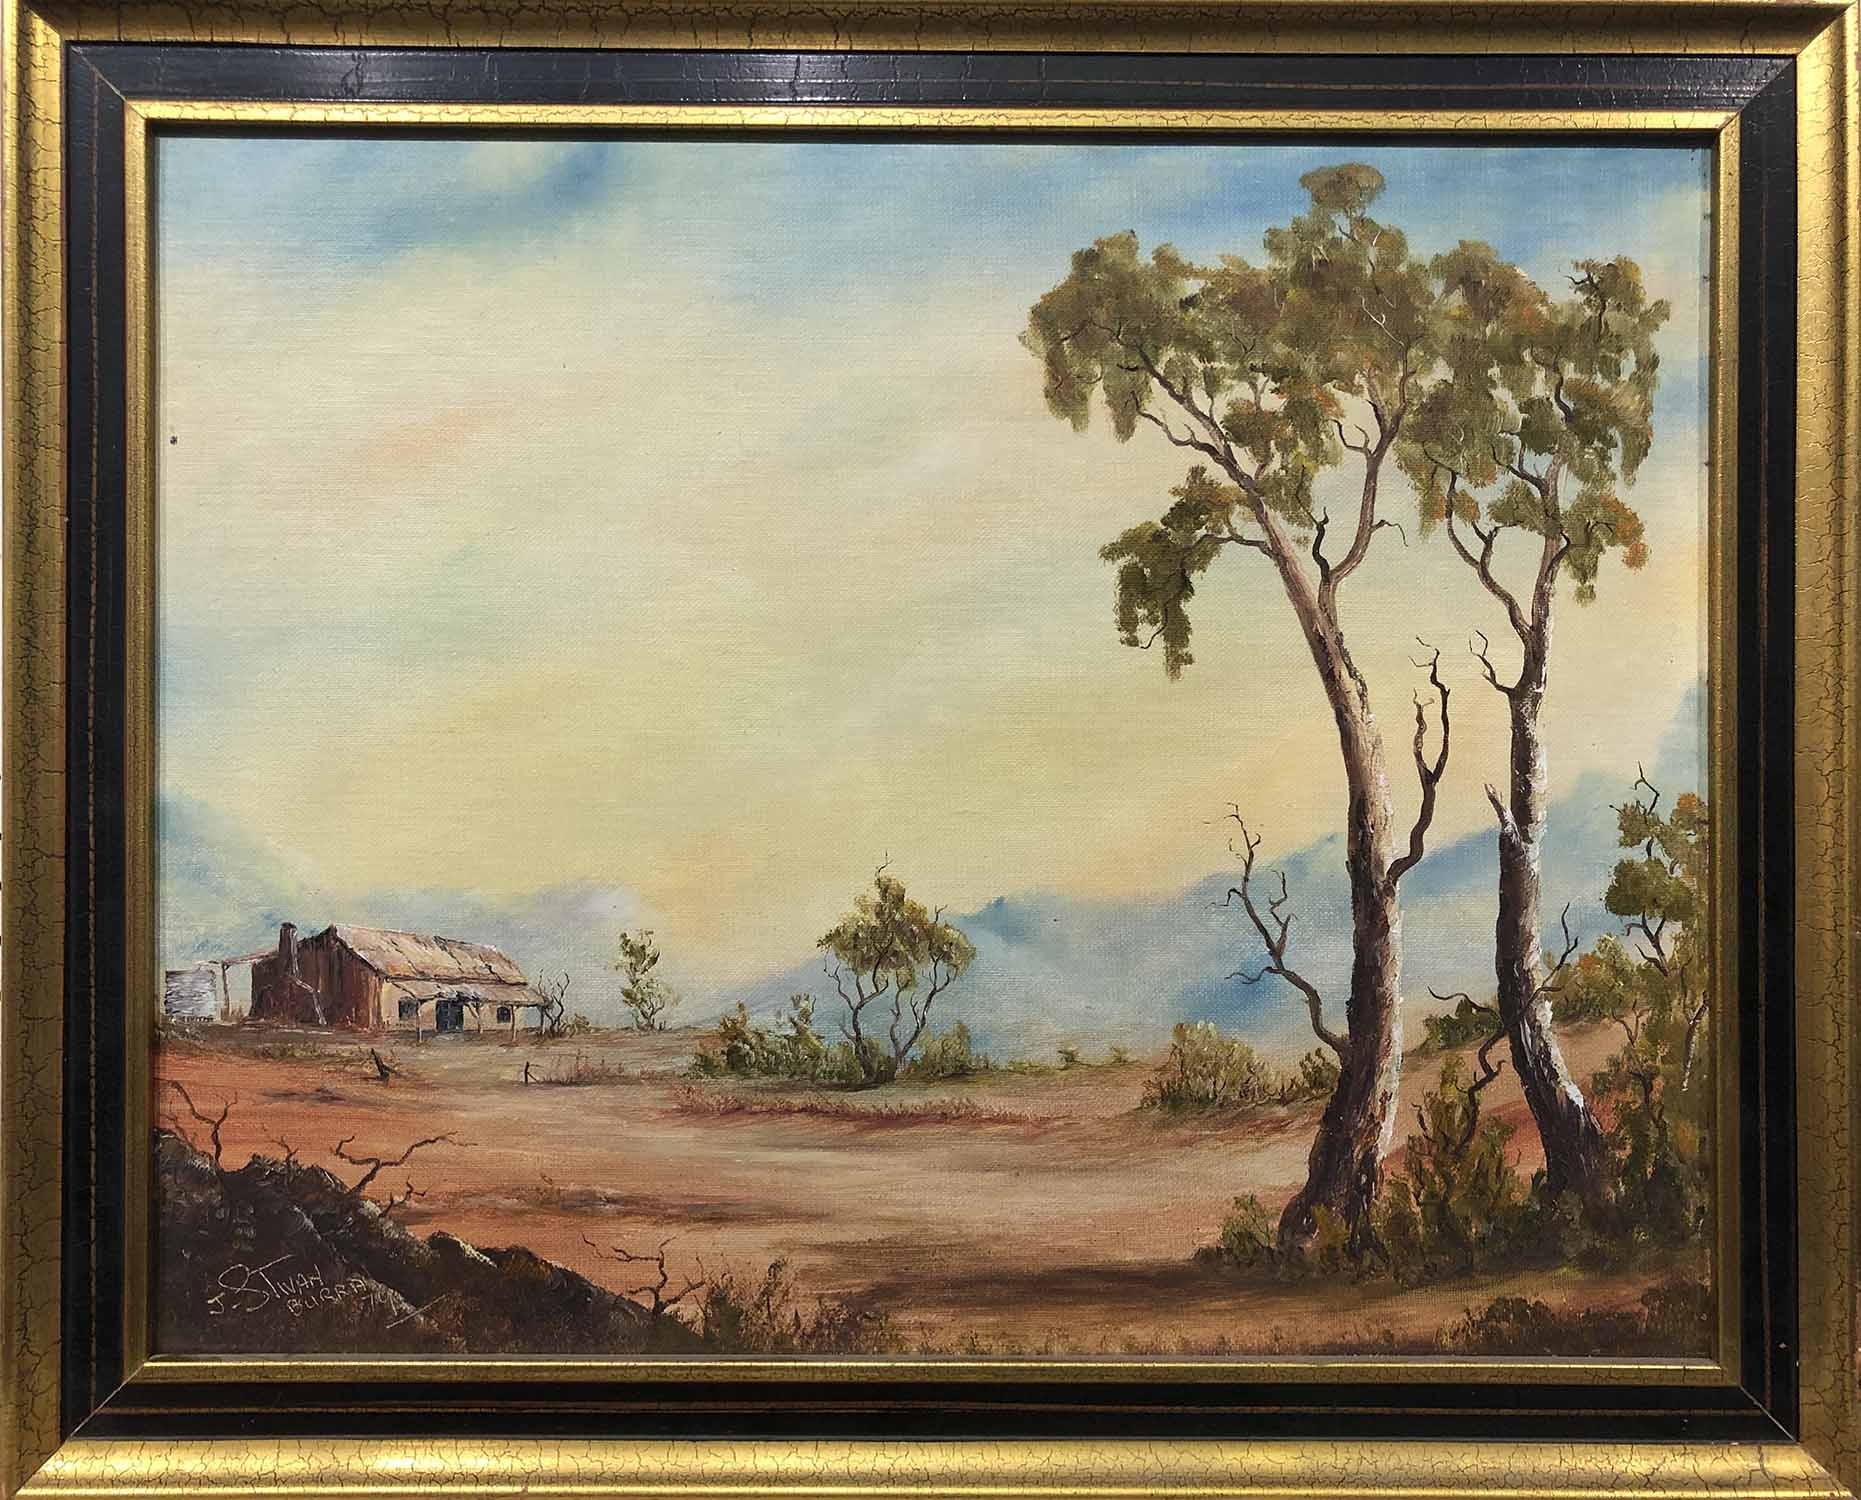 J STIVAN, 'Landscapes Burra Australia', oil on board 39cm x 49cm, a pair, signed and dated 79, - Image 2 of 6